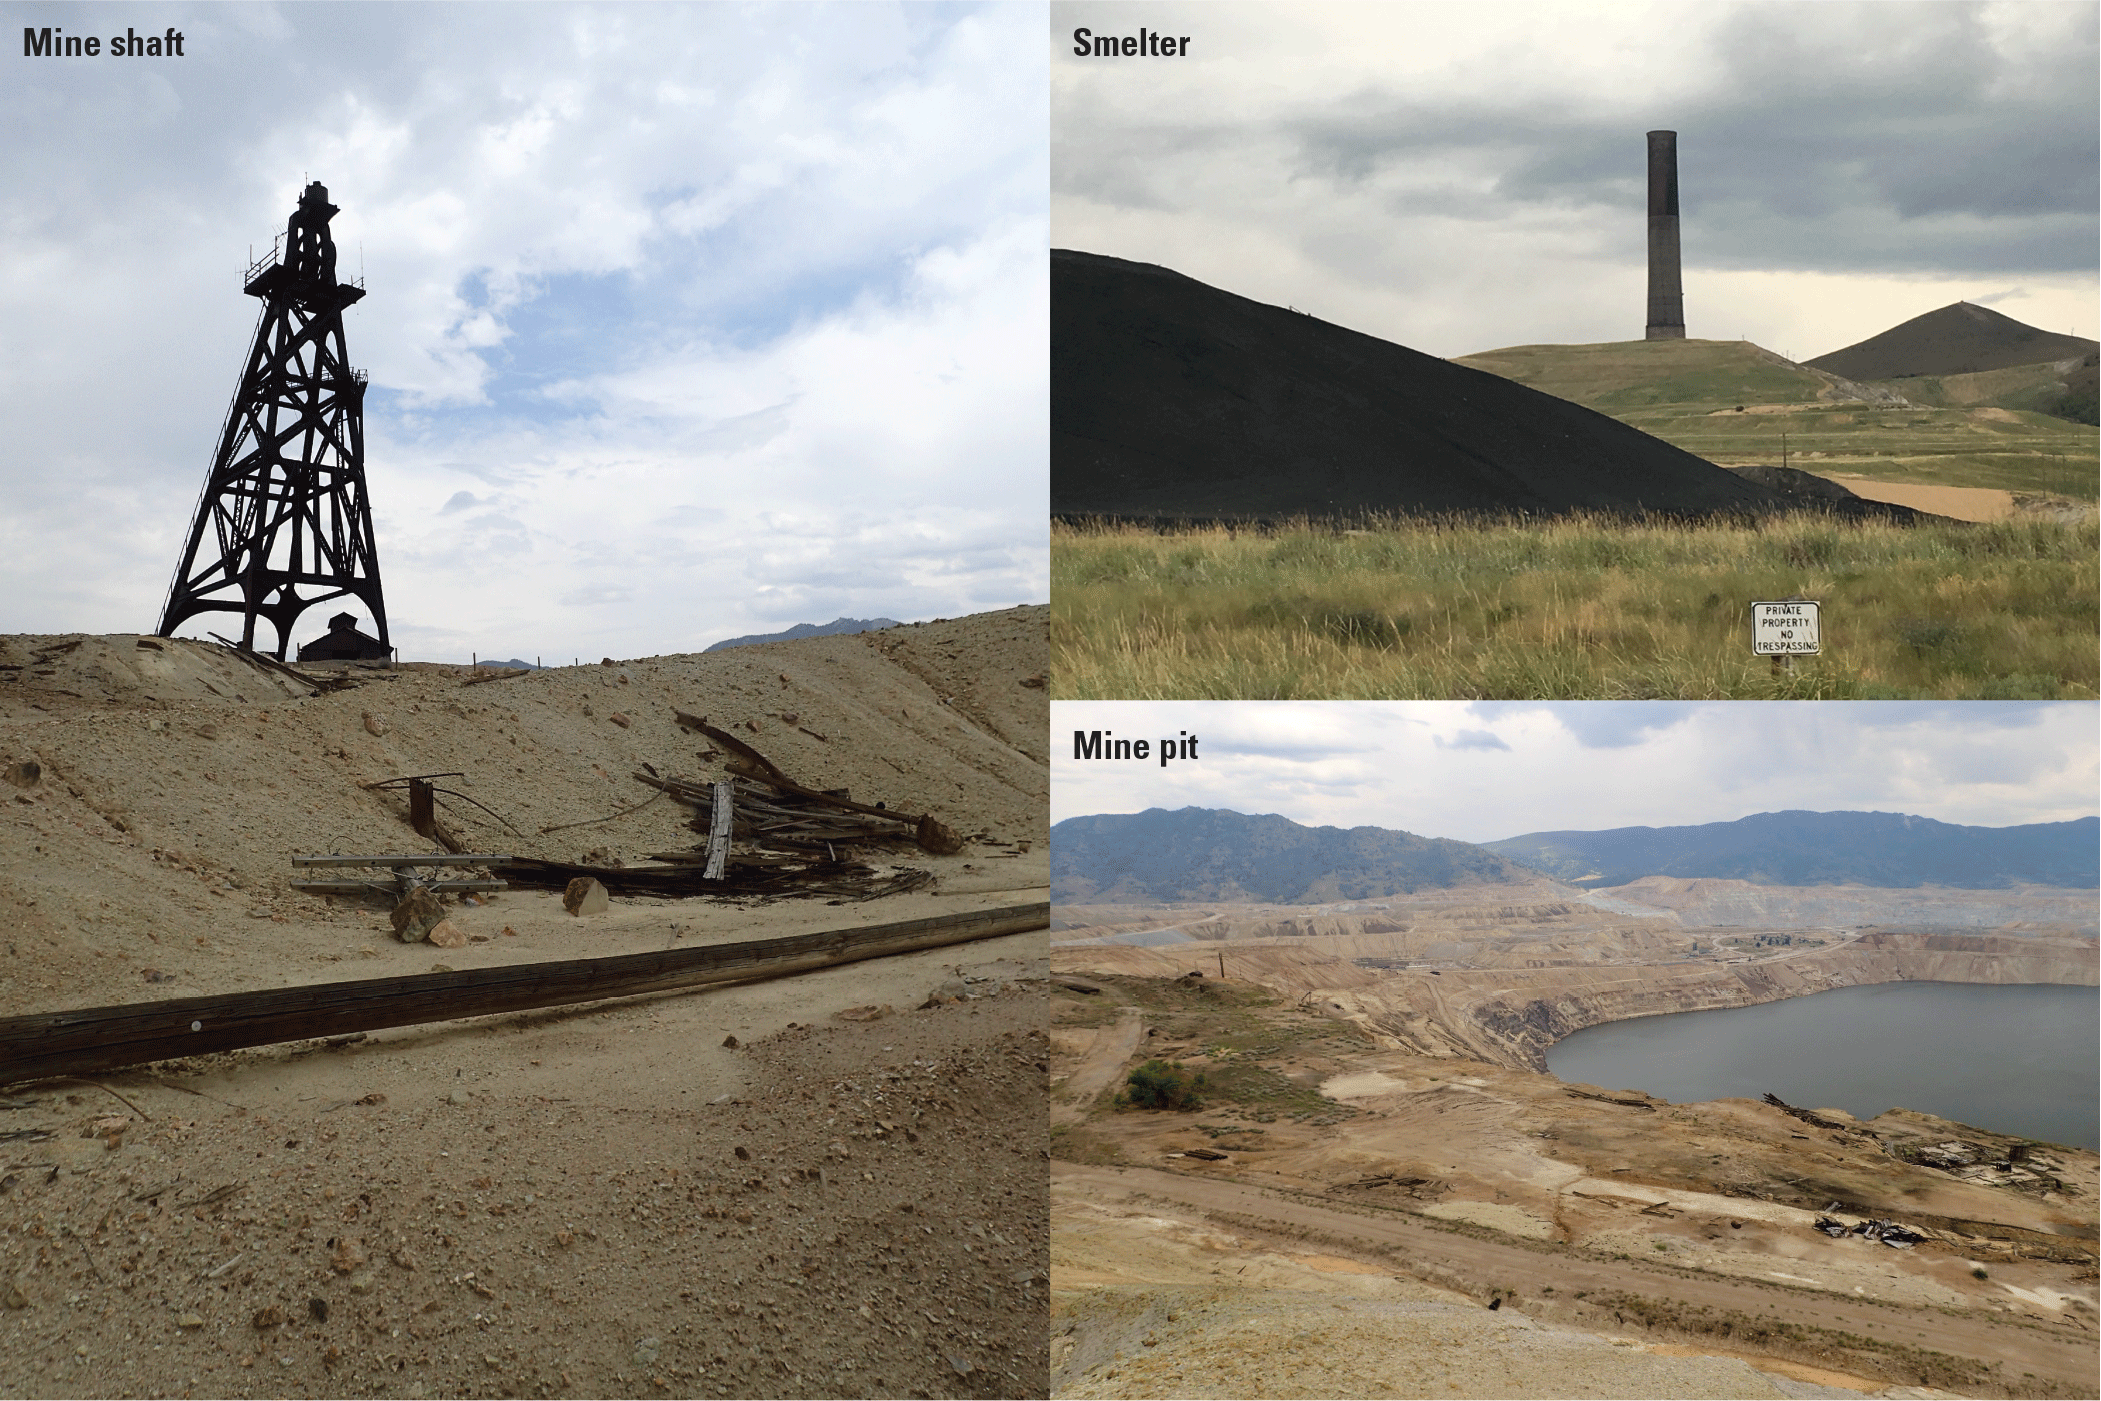 The land surrounding the mine shaft and pit are mostly barren with minimal living
                        vegetation.